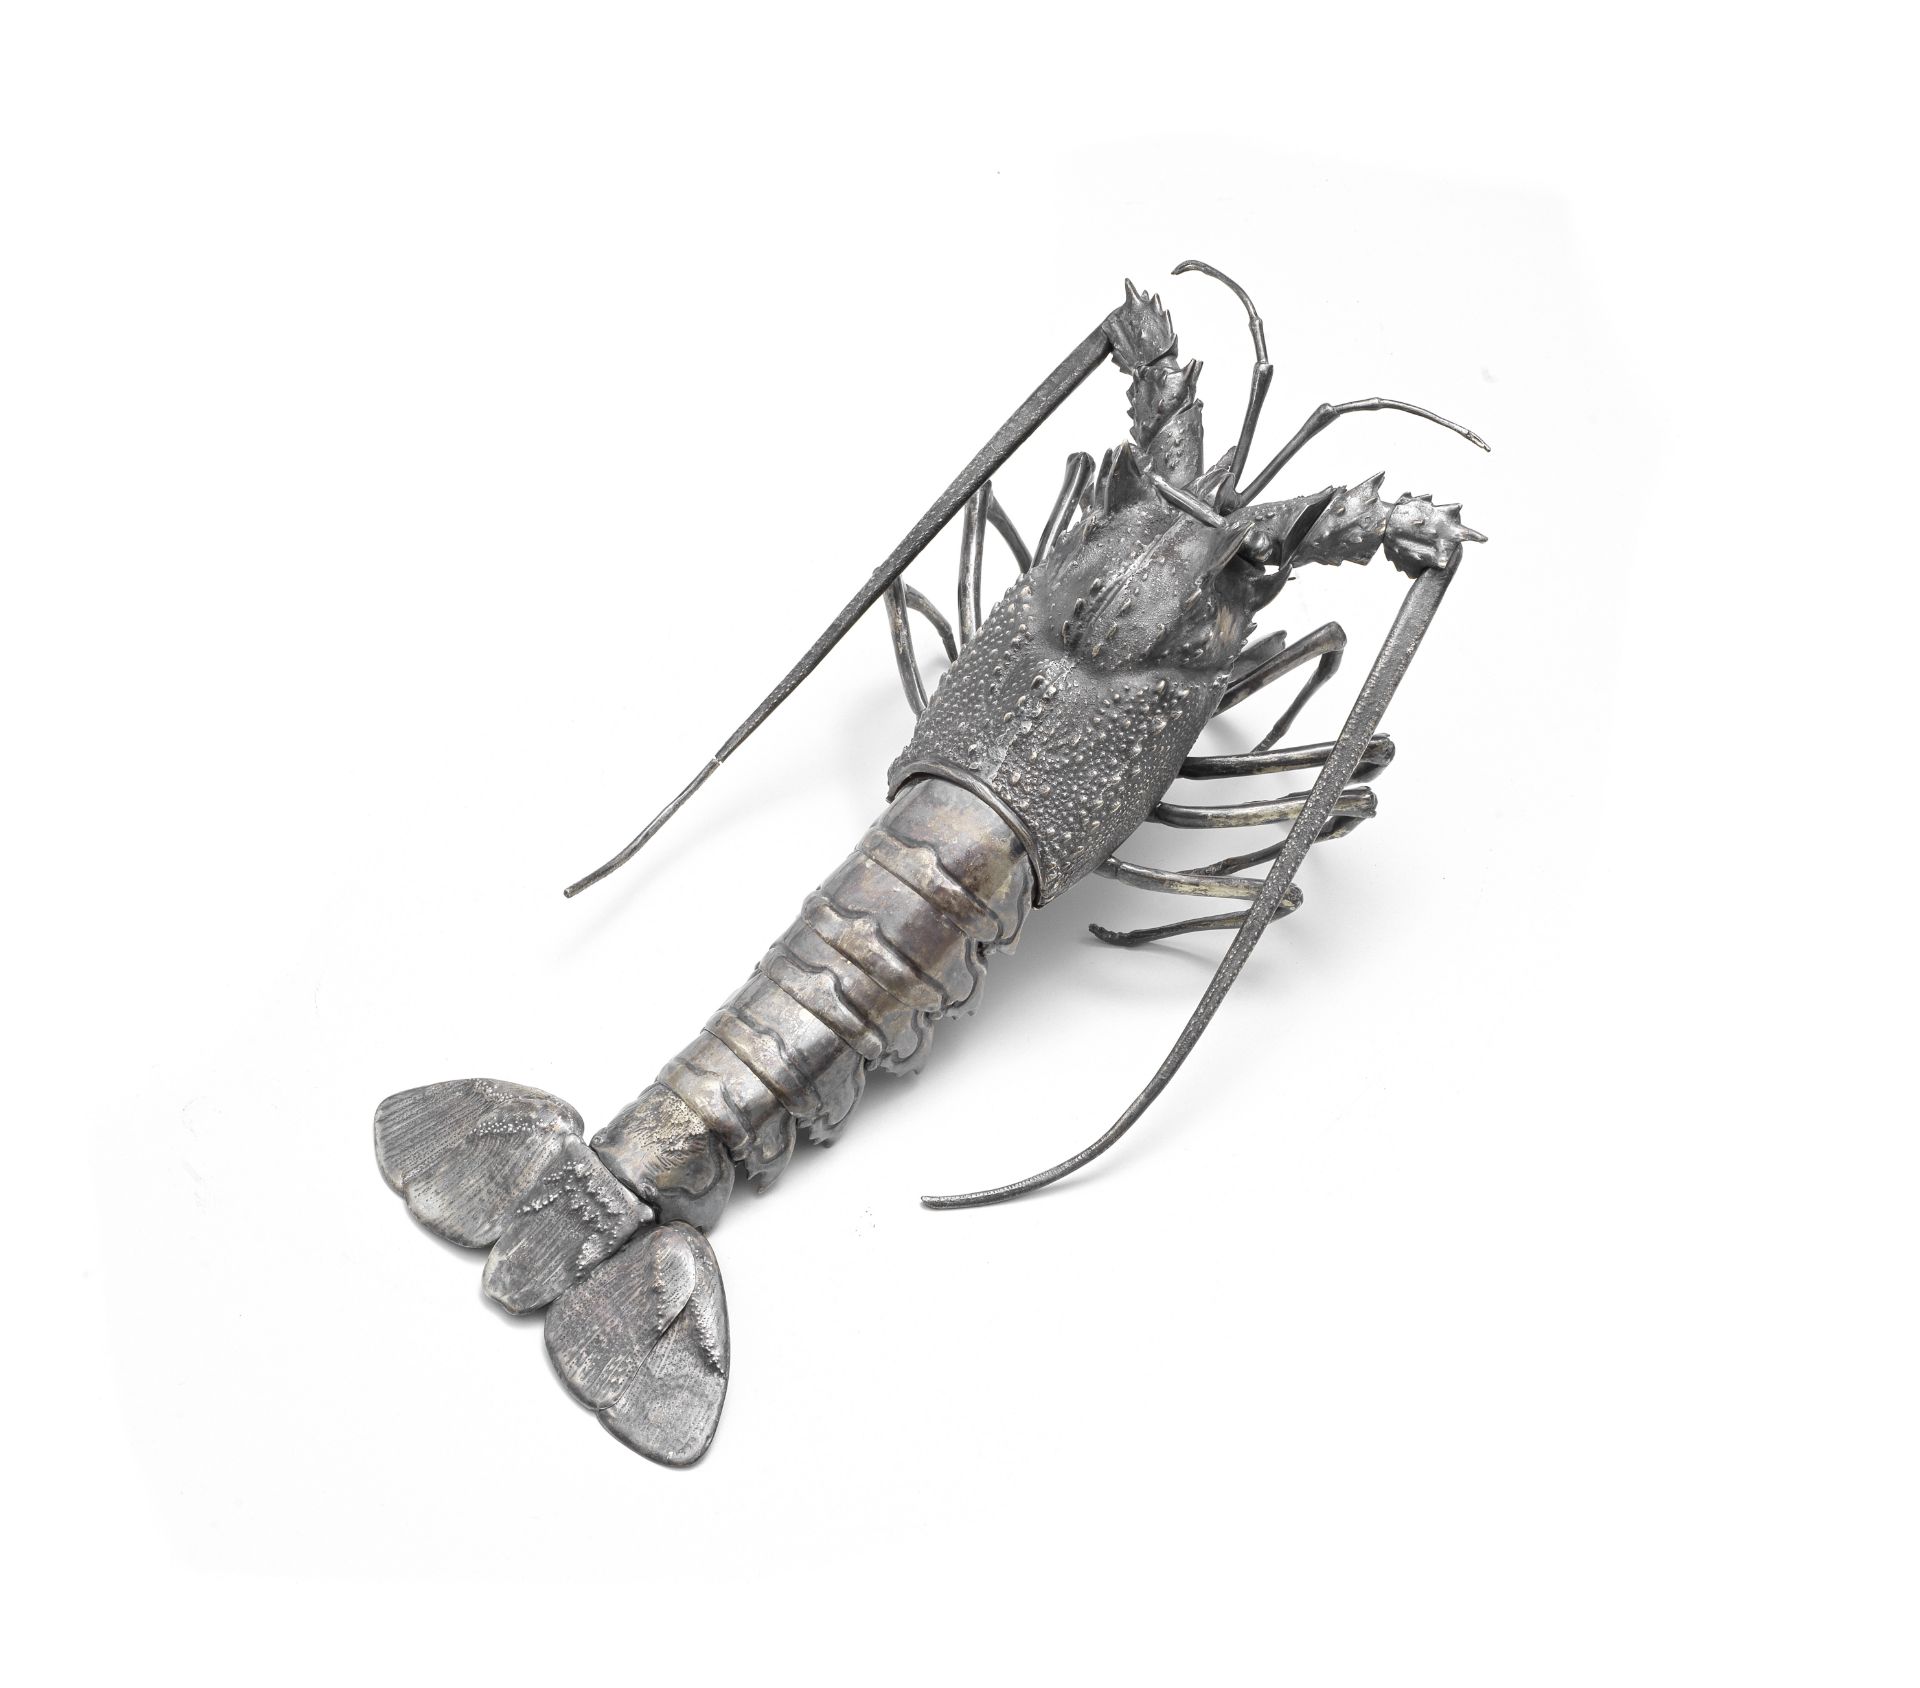 A LARGE SILVER JIZAI OKIMONO OF A SPINY LOBSTER Meiji era (1868-1912), late 19th/early 20th century